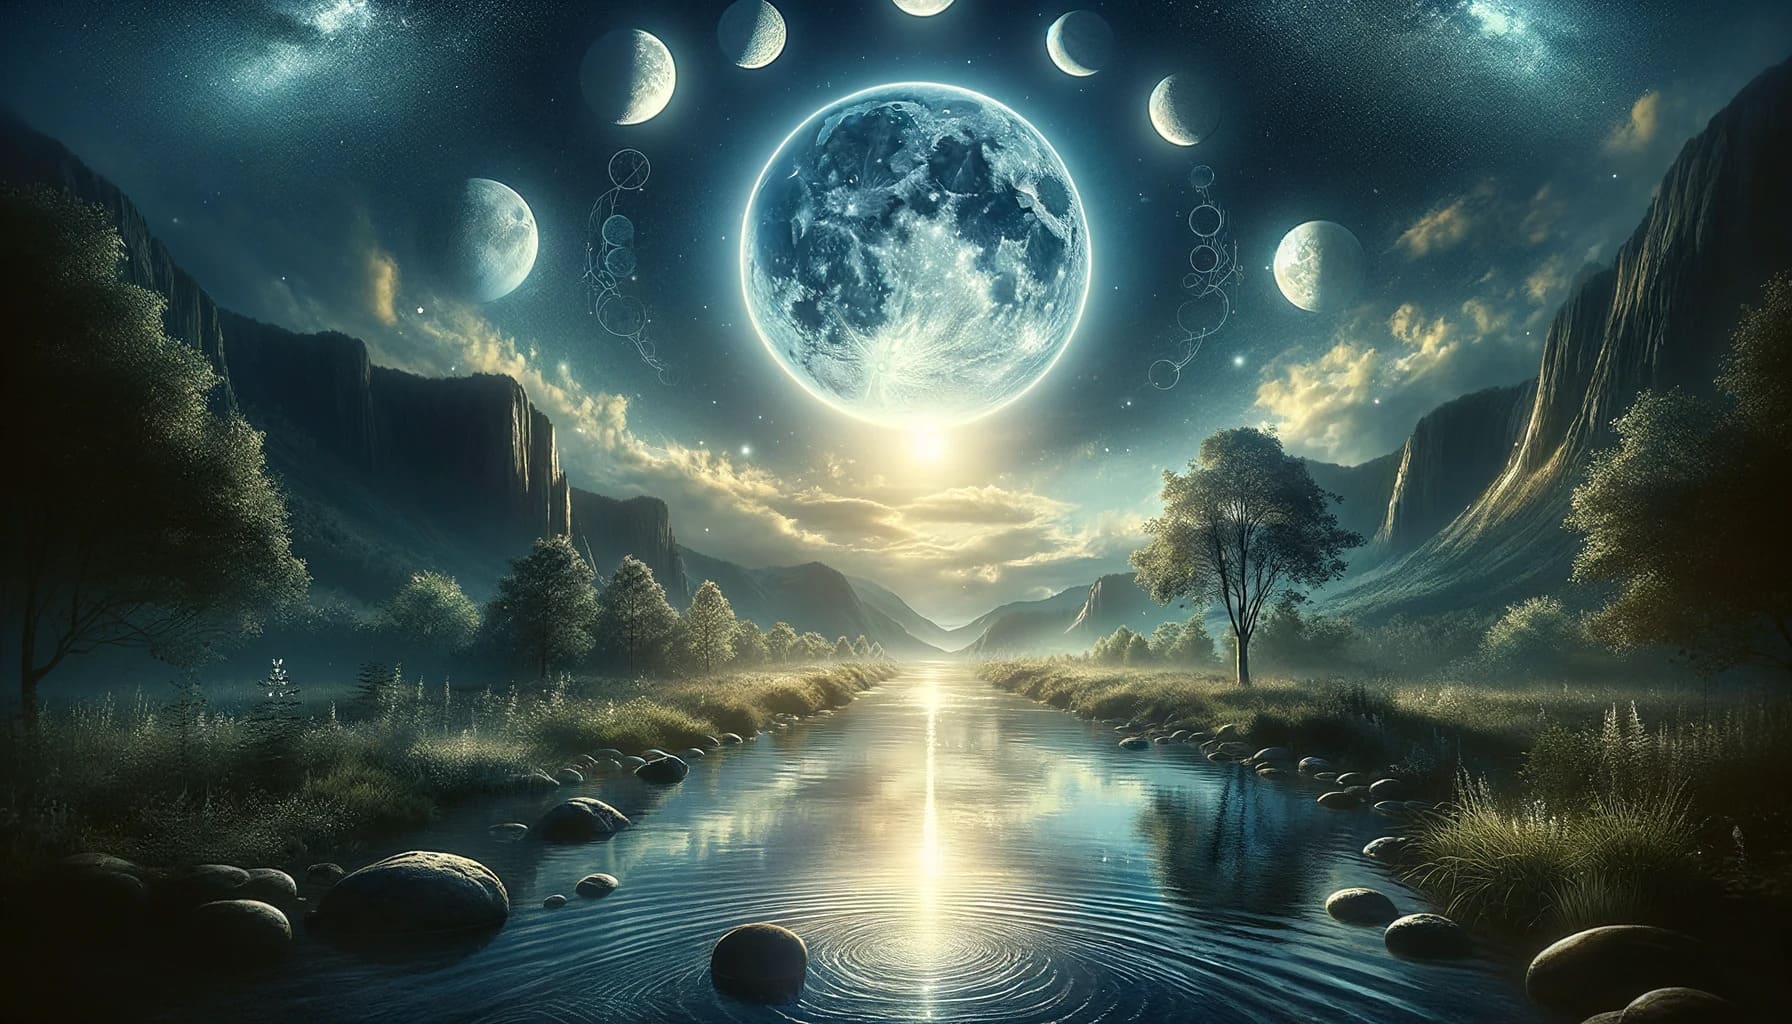 serene nocturnal landscape under the waning gibbous moon highlighting a peaceful river reflecting the moonlight. The scene evokes a sense of intros